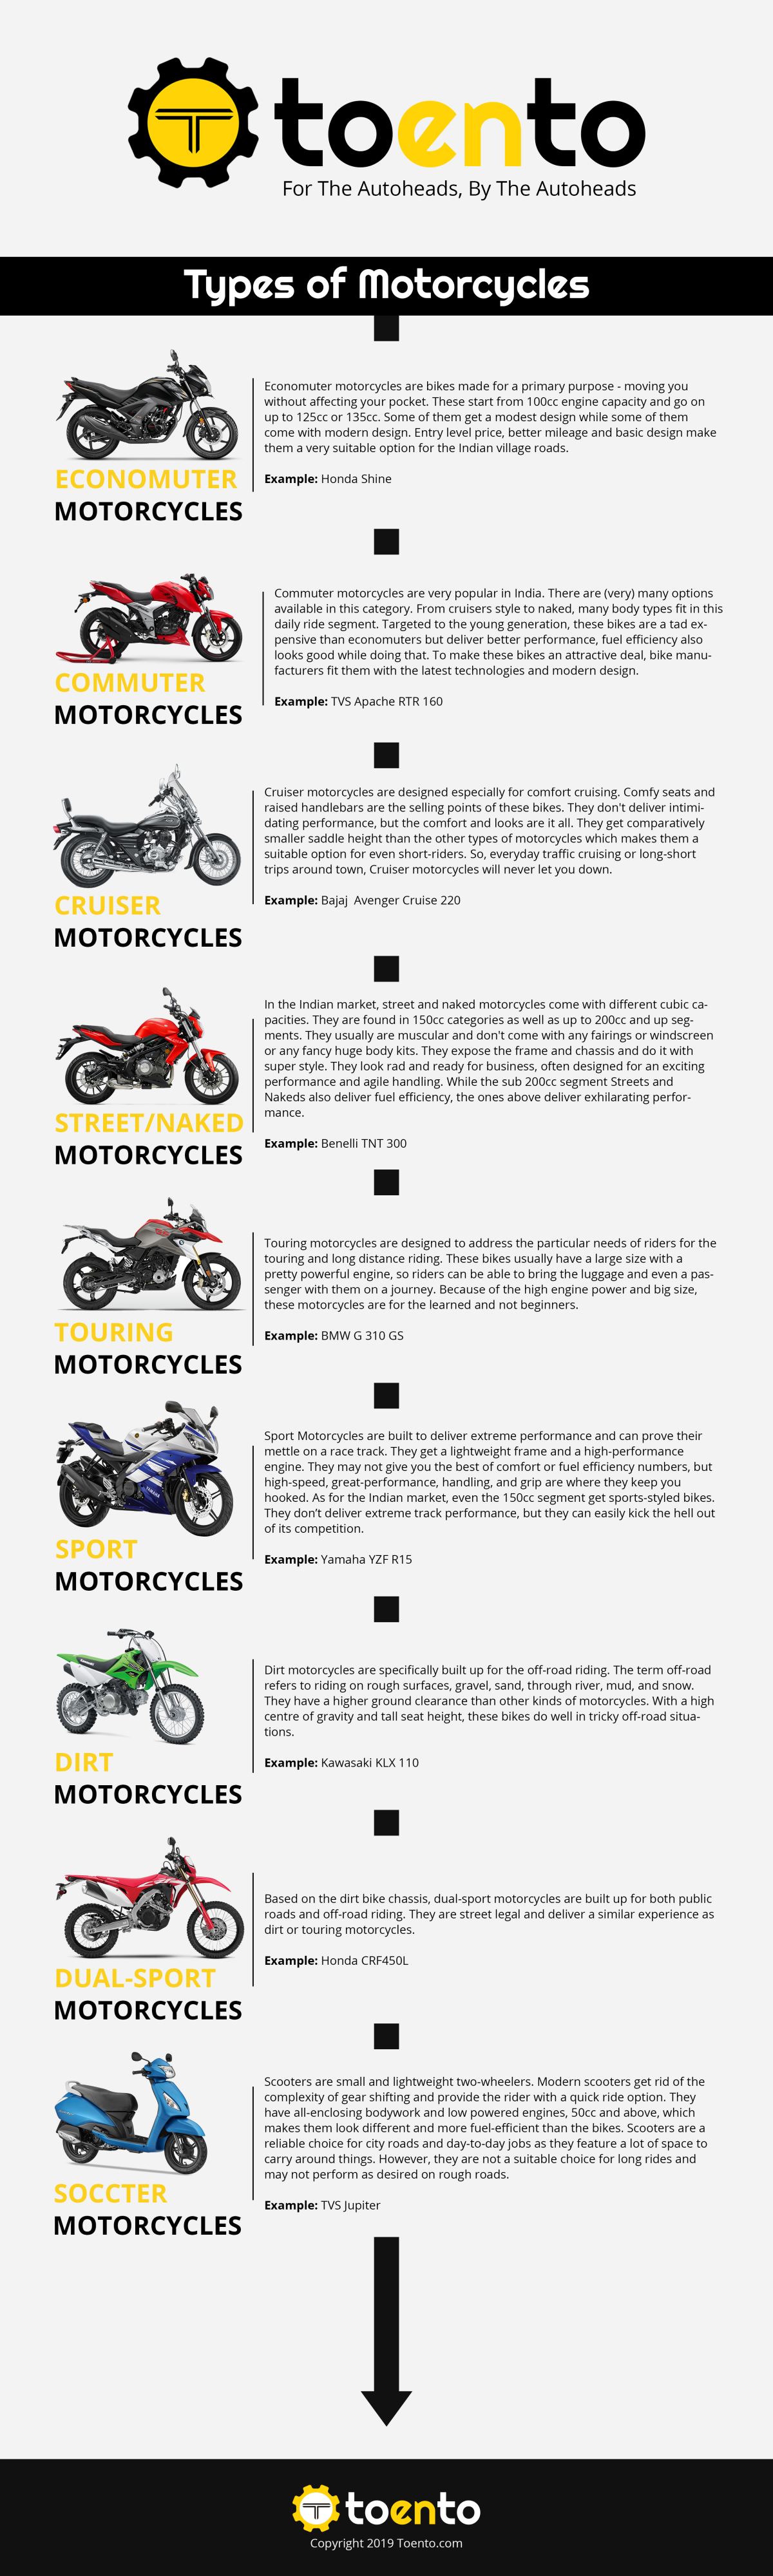 Motorcycle Types Motorcycles In India Touring Motorcycles